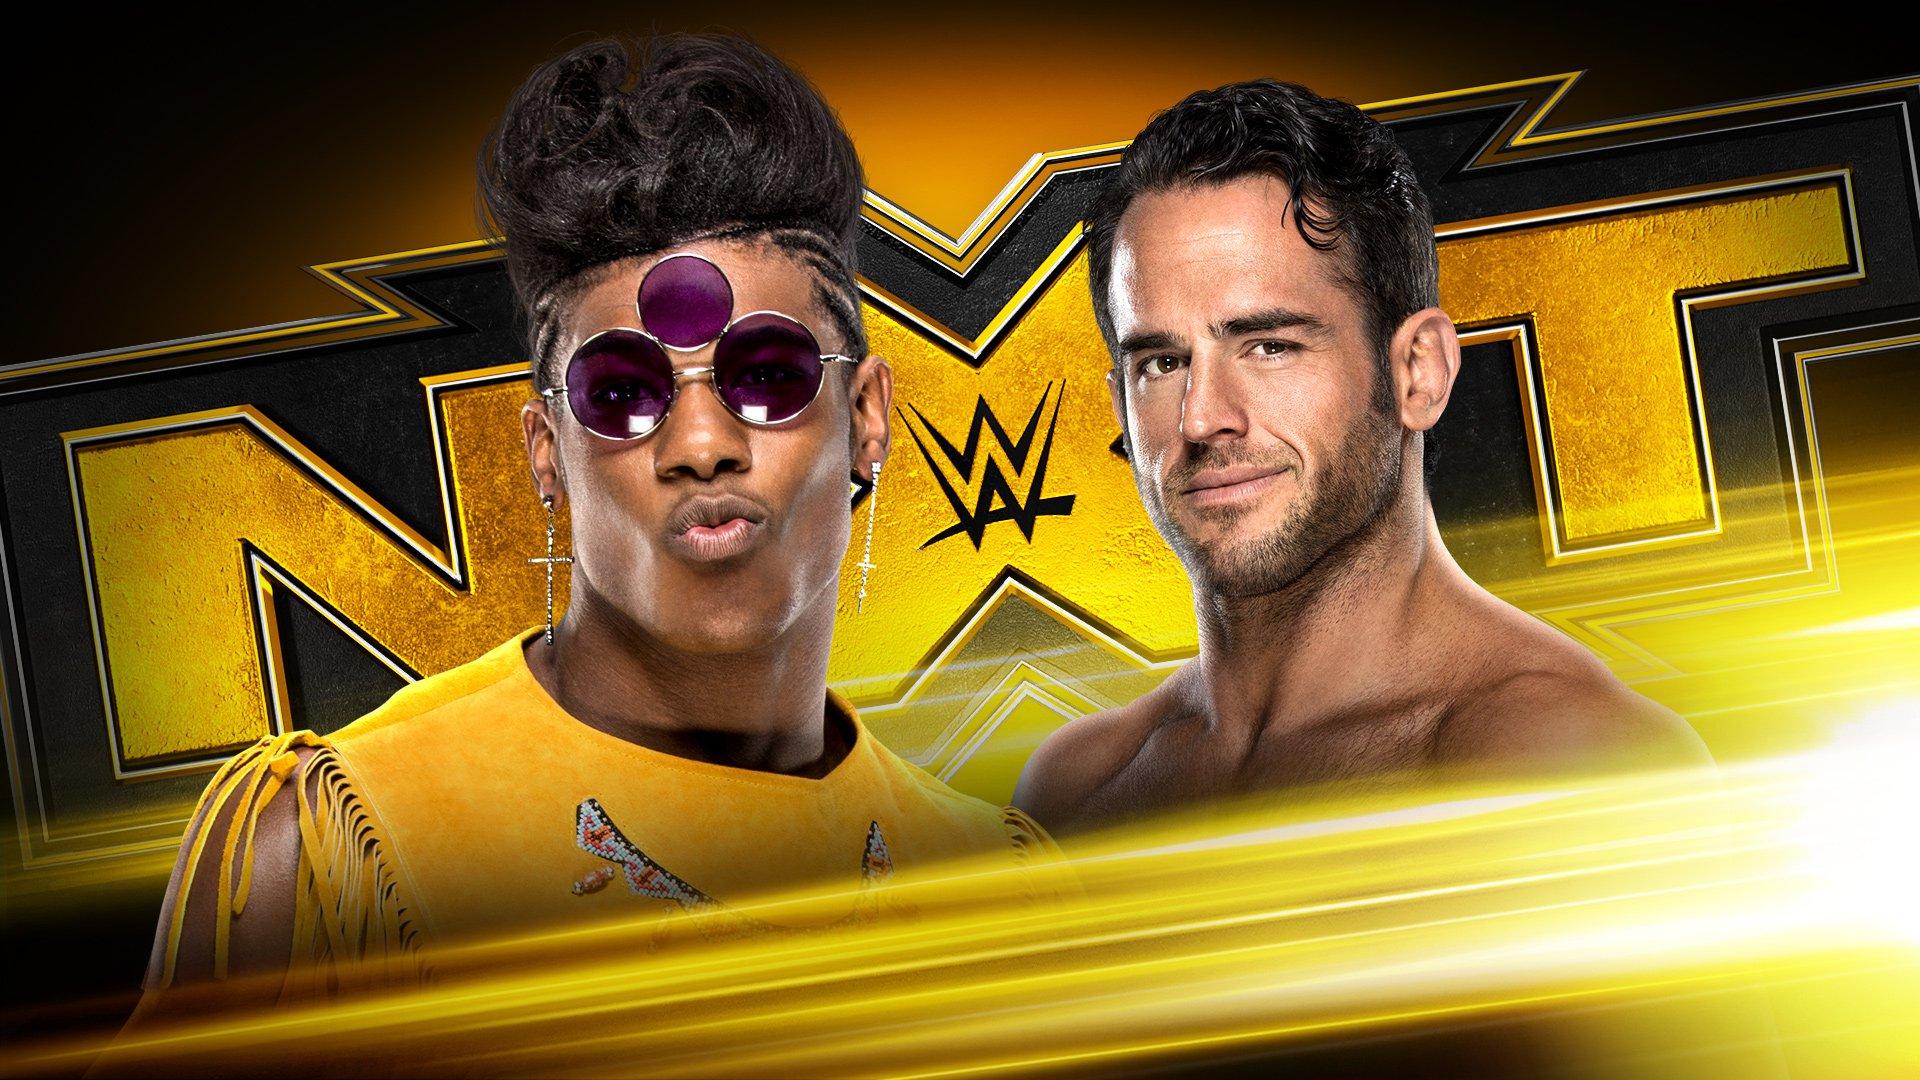 Matches & Segments Confirmed For WWE NXT This Week